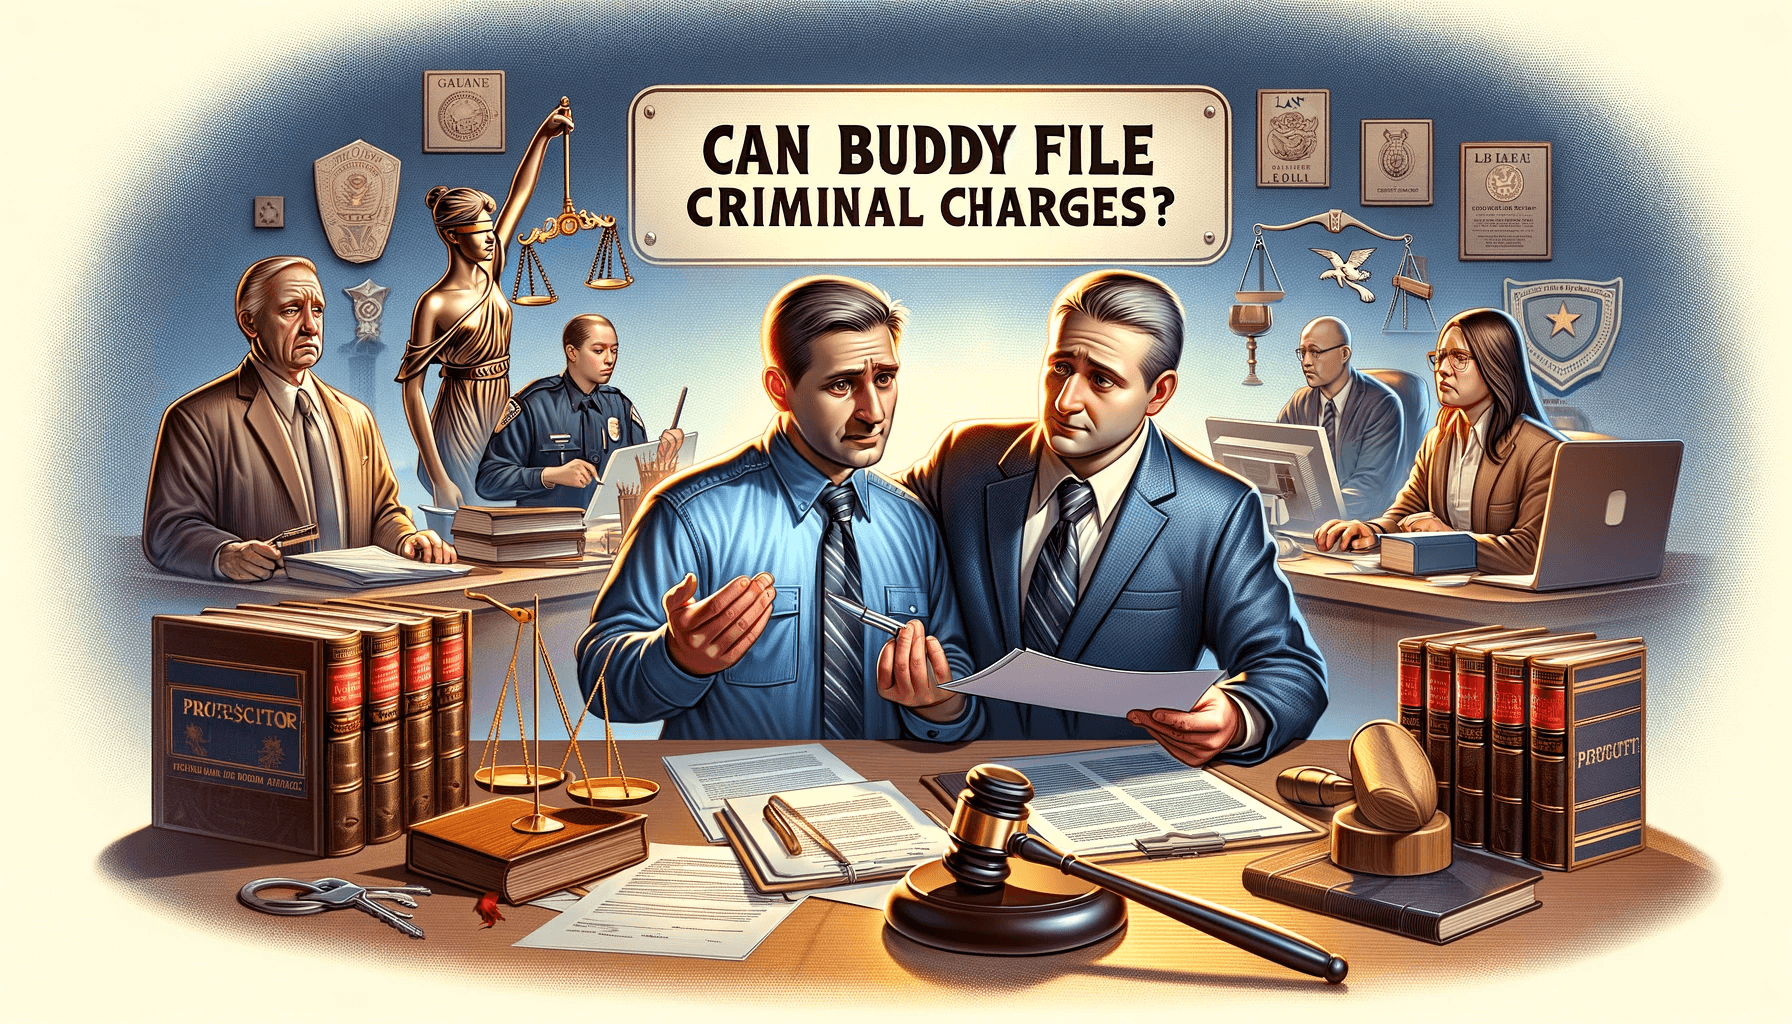 Can buddy's file Criminal Charges